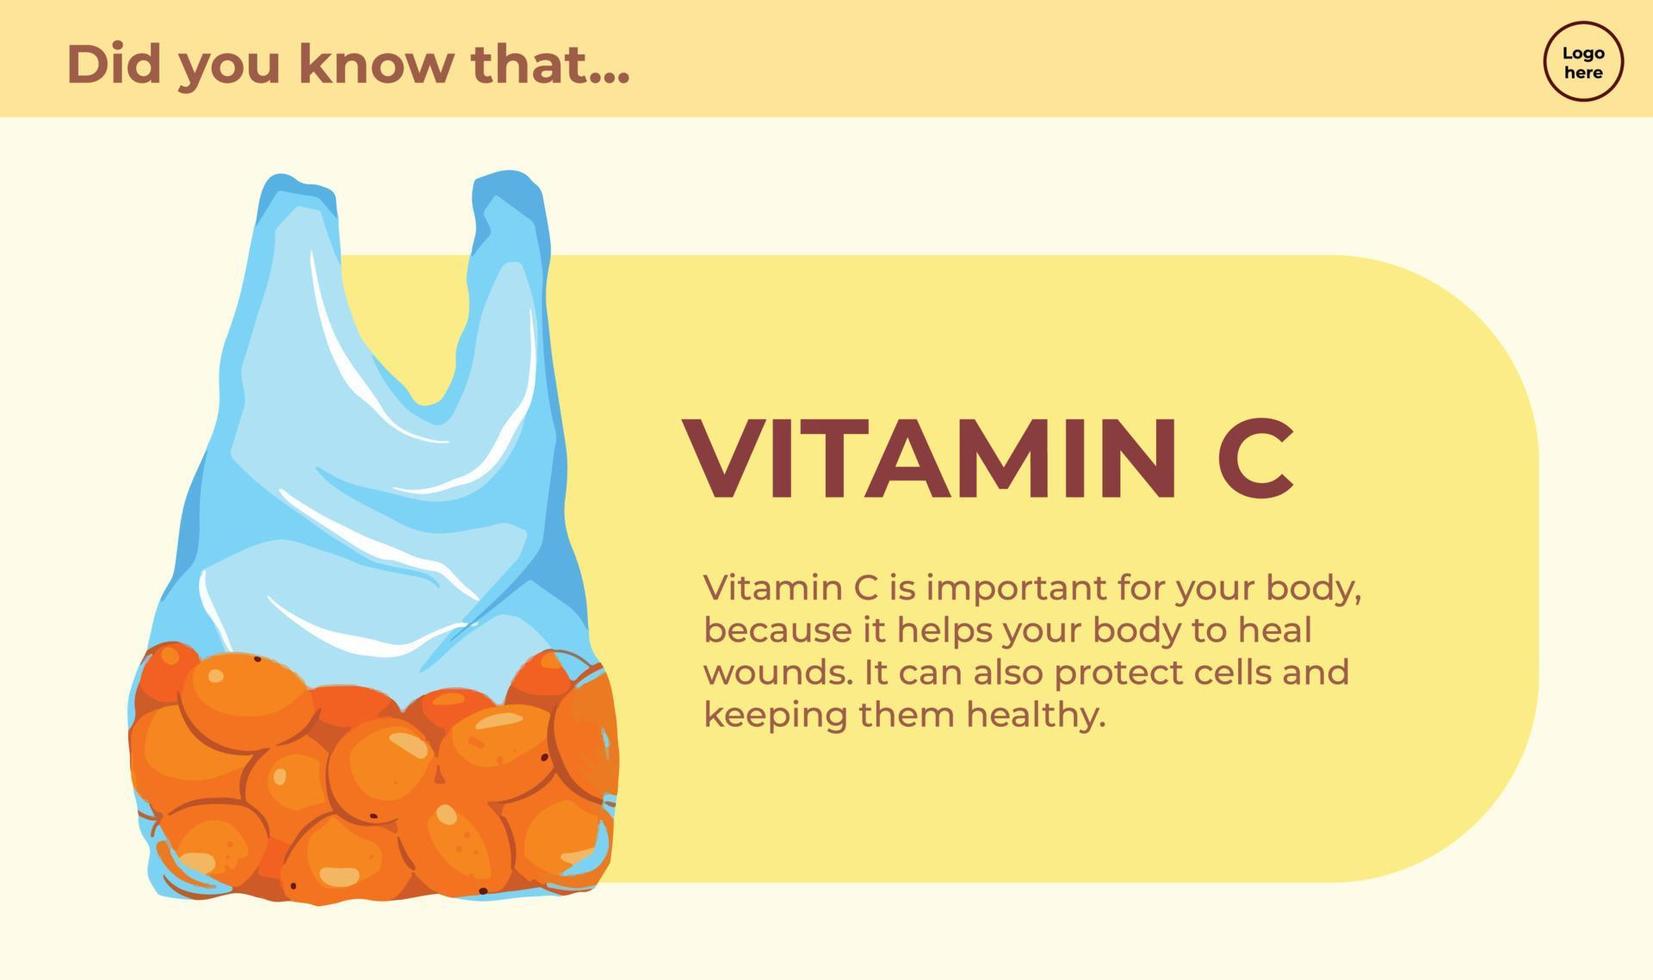 Vitamin C healthy supplement vector illustration banner or poster with descriptive texts isolated on landscape template. Simple and flat lay out for minimalist styled social media, web, brochure.